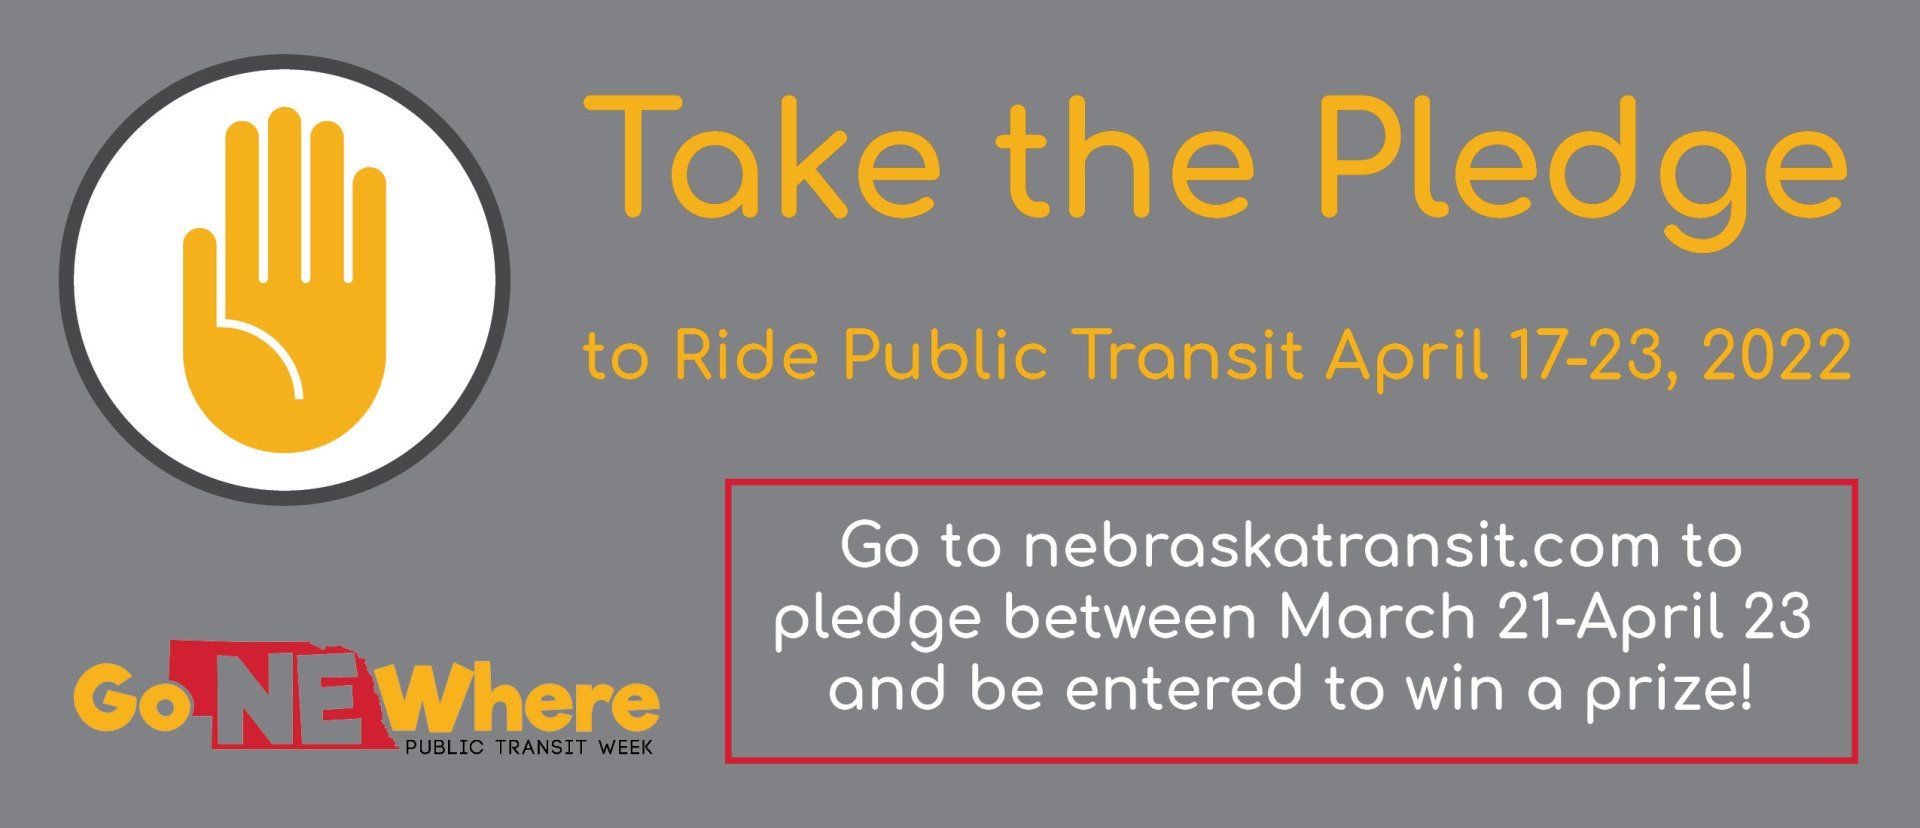 icon of a hand held up and the Go NE Where Public Transit Week logo with the words Take the Pledge to Ride Public Transit April 17-23, 2022. Go to nebraskatransit.com to pledge between March 21-April 23 and be entered to win a prize.